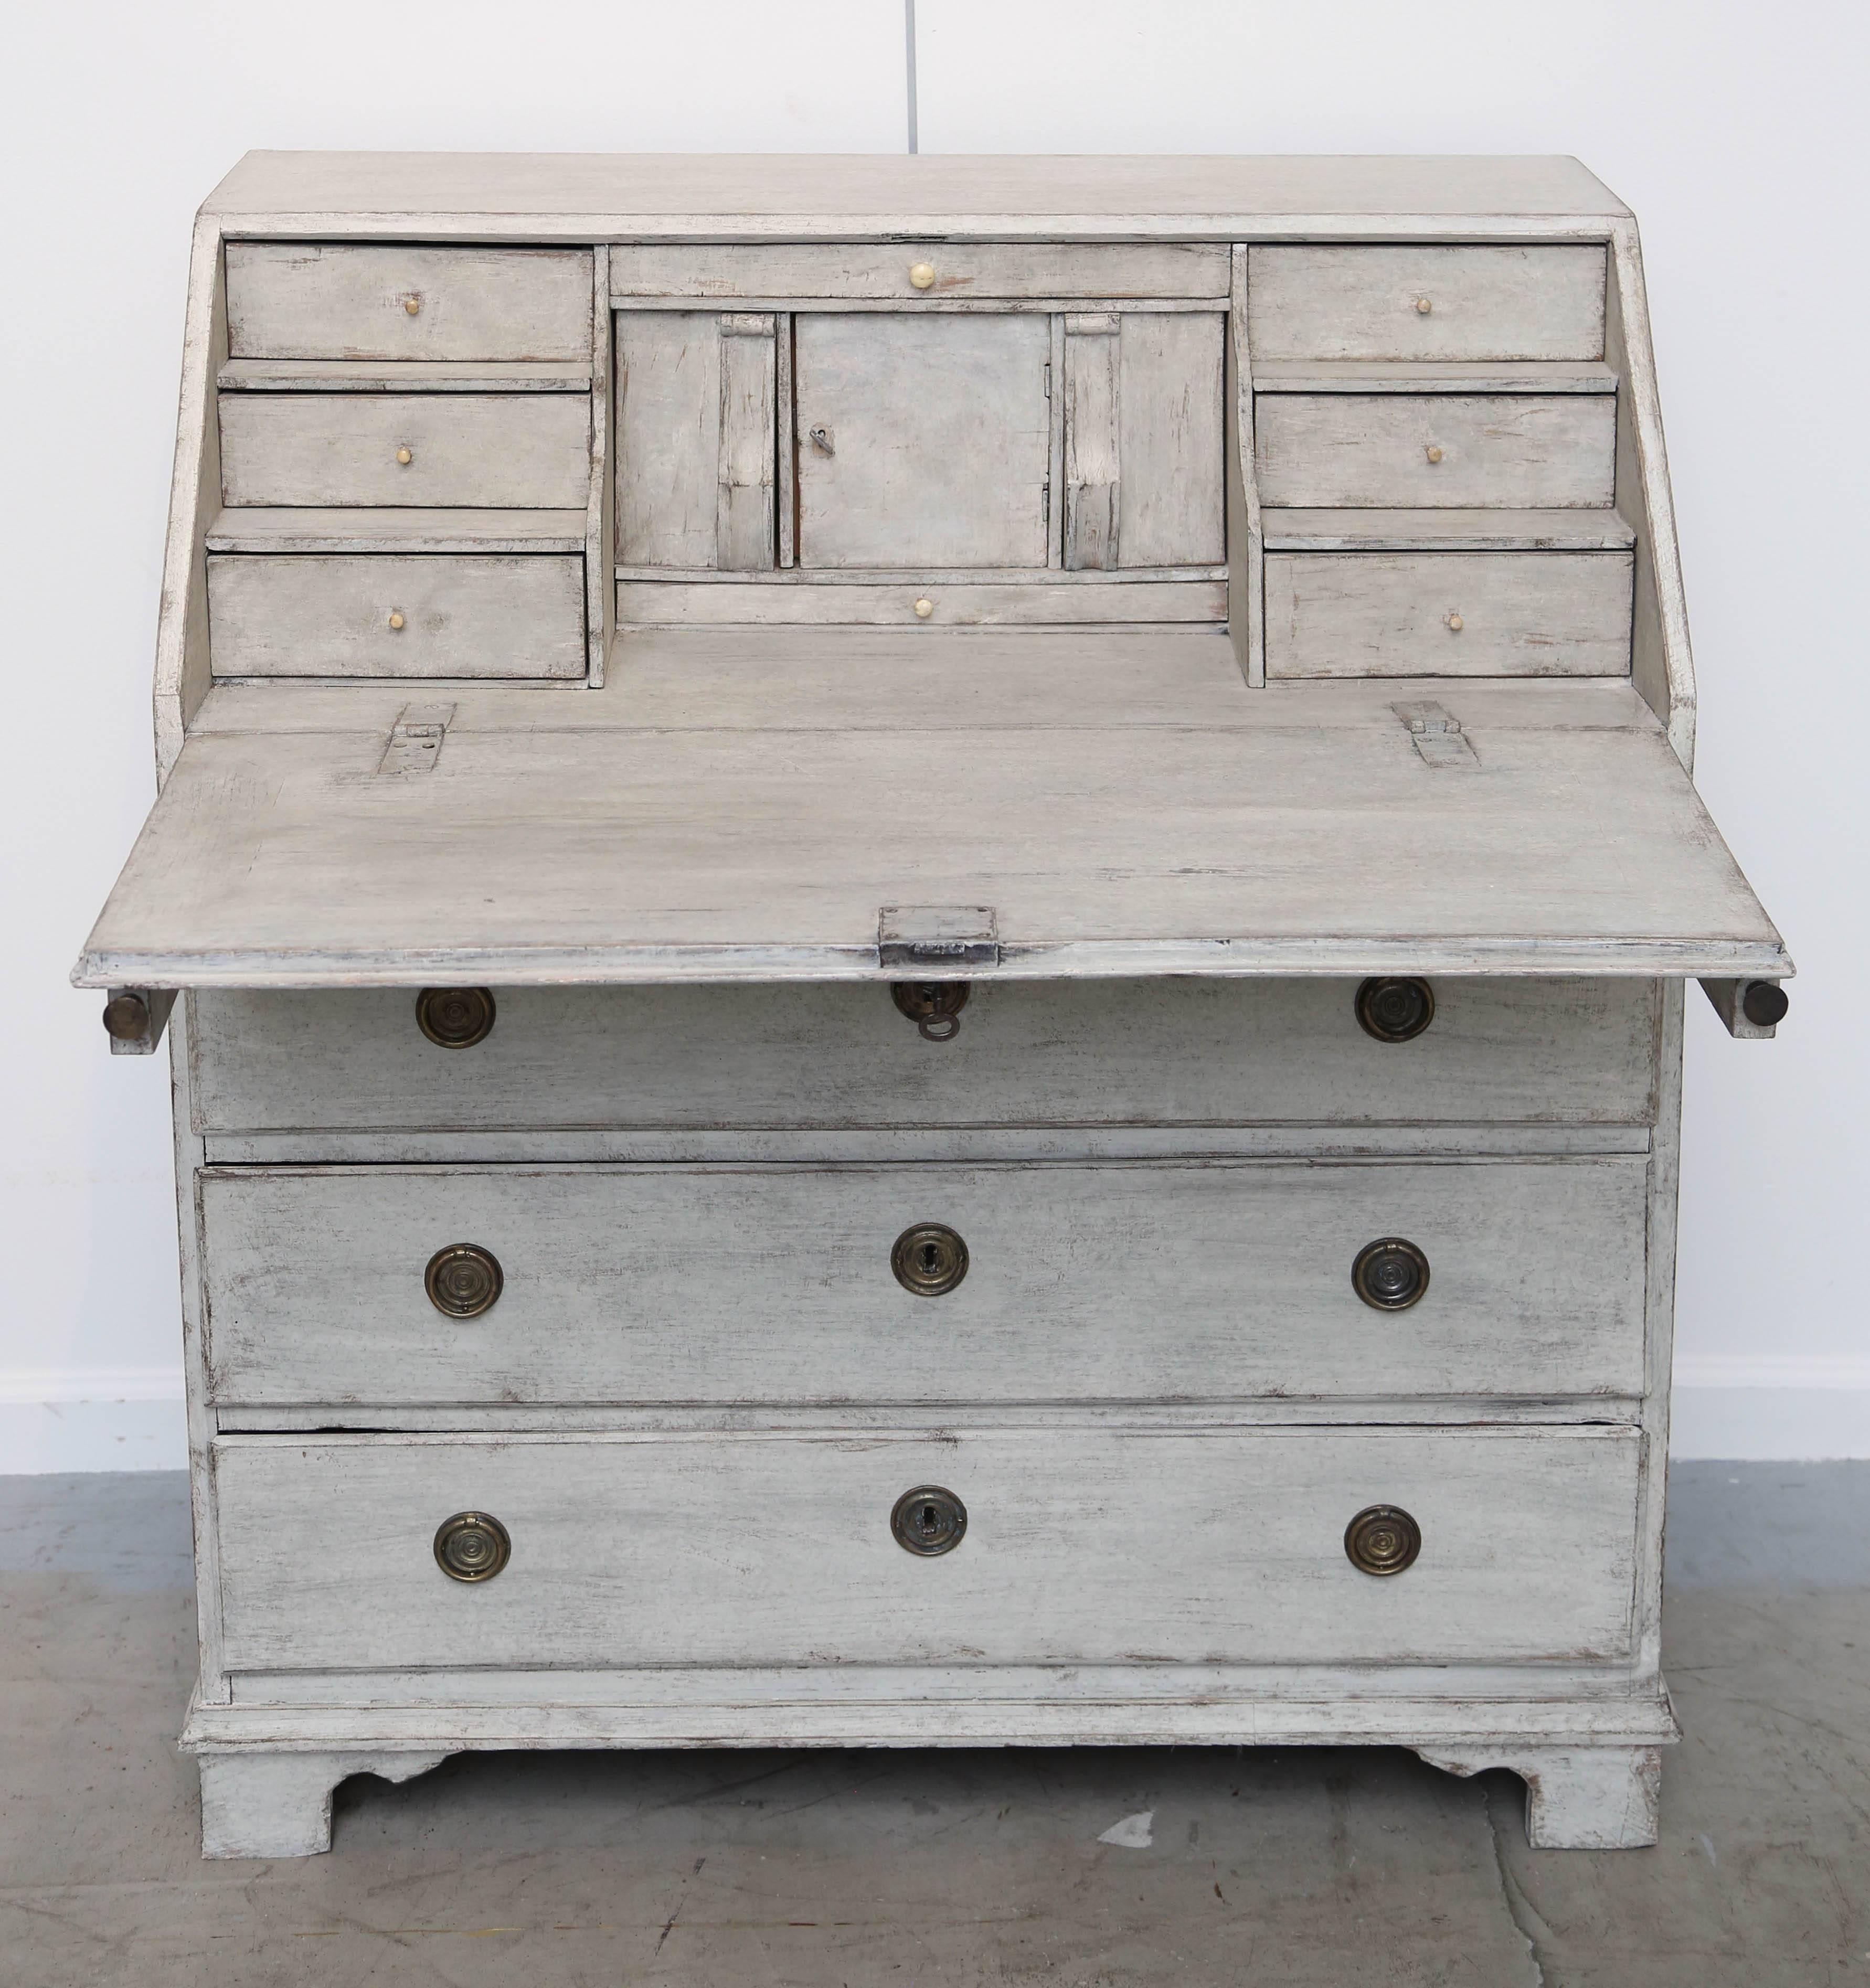 Terrific antique Swedish period painted slant front desk refreshed distressed greyish- white with bone pulls on the upper compartments. There is a lockable centre space flanked by drawers. This charming desk has three dove tail drawers and metal